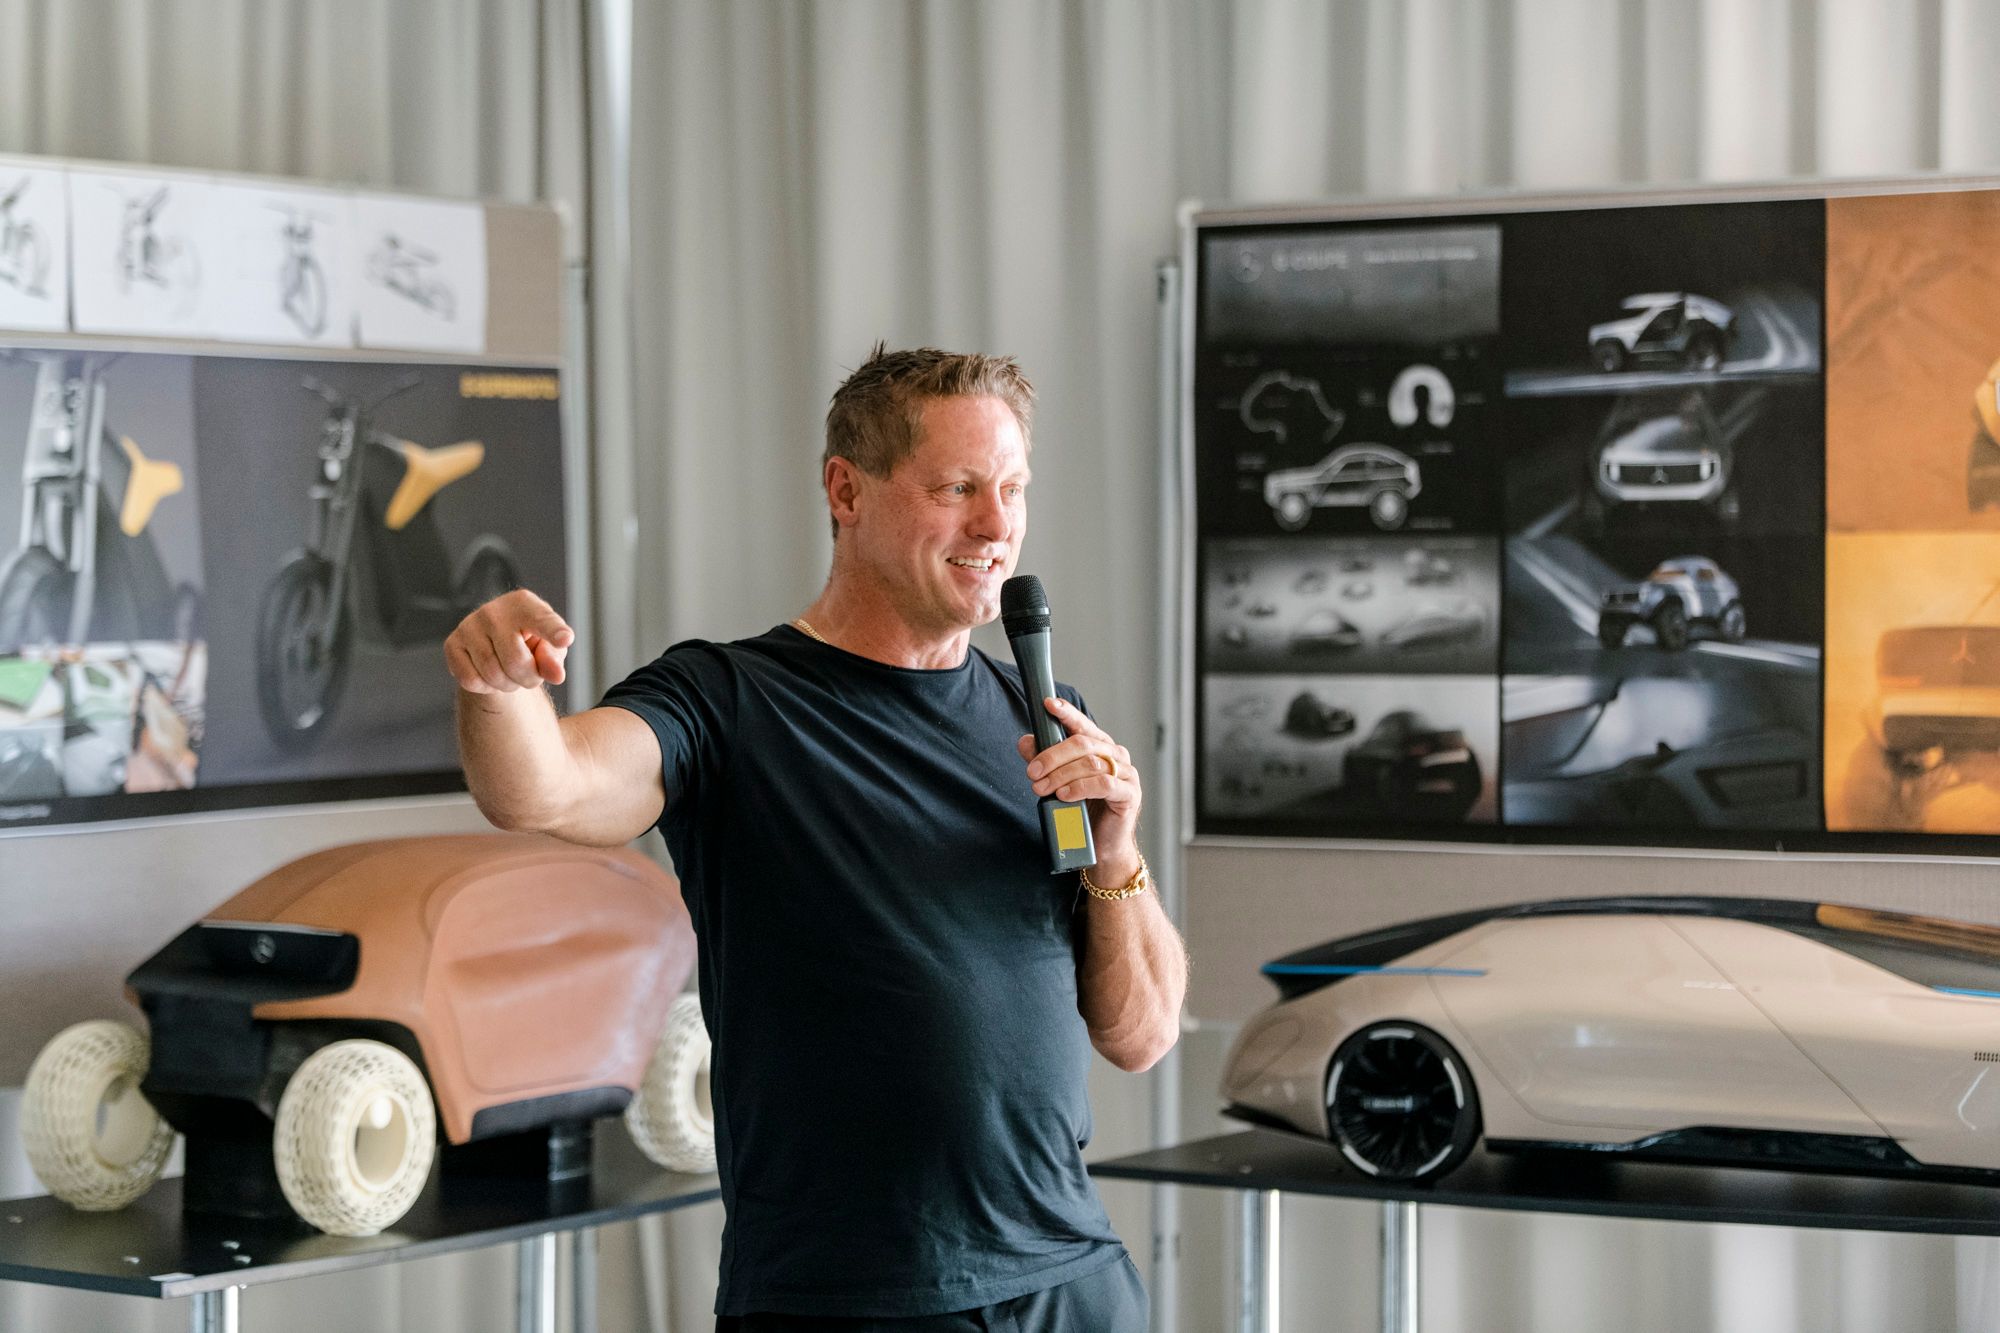 MOME’s new vehicle design studio, the Mobility Design Lab, has been inaugurated | Interview about the past and future of vehicle design II.